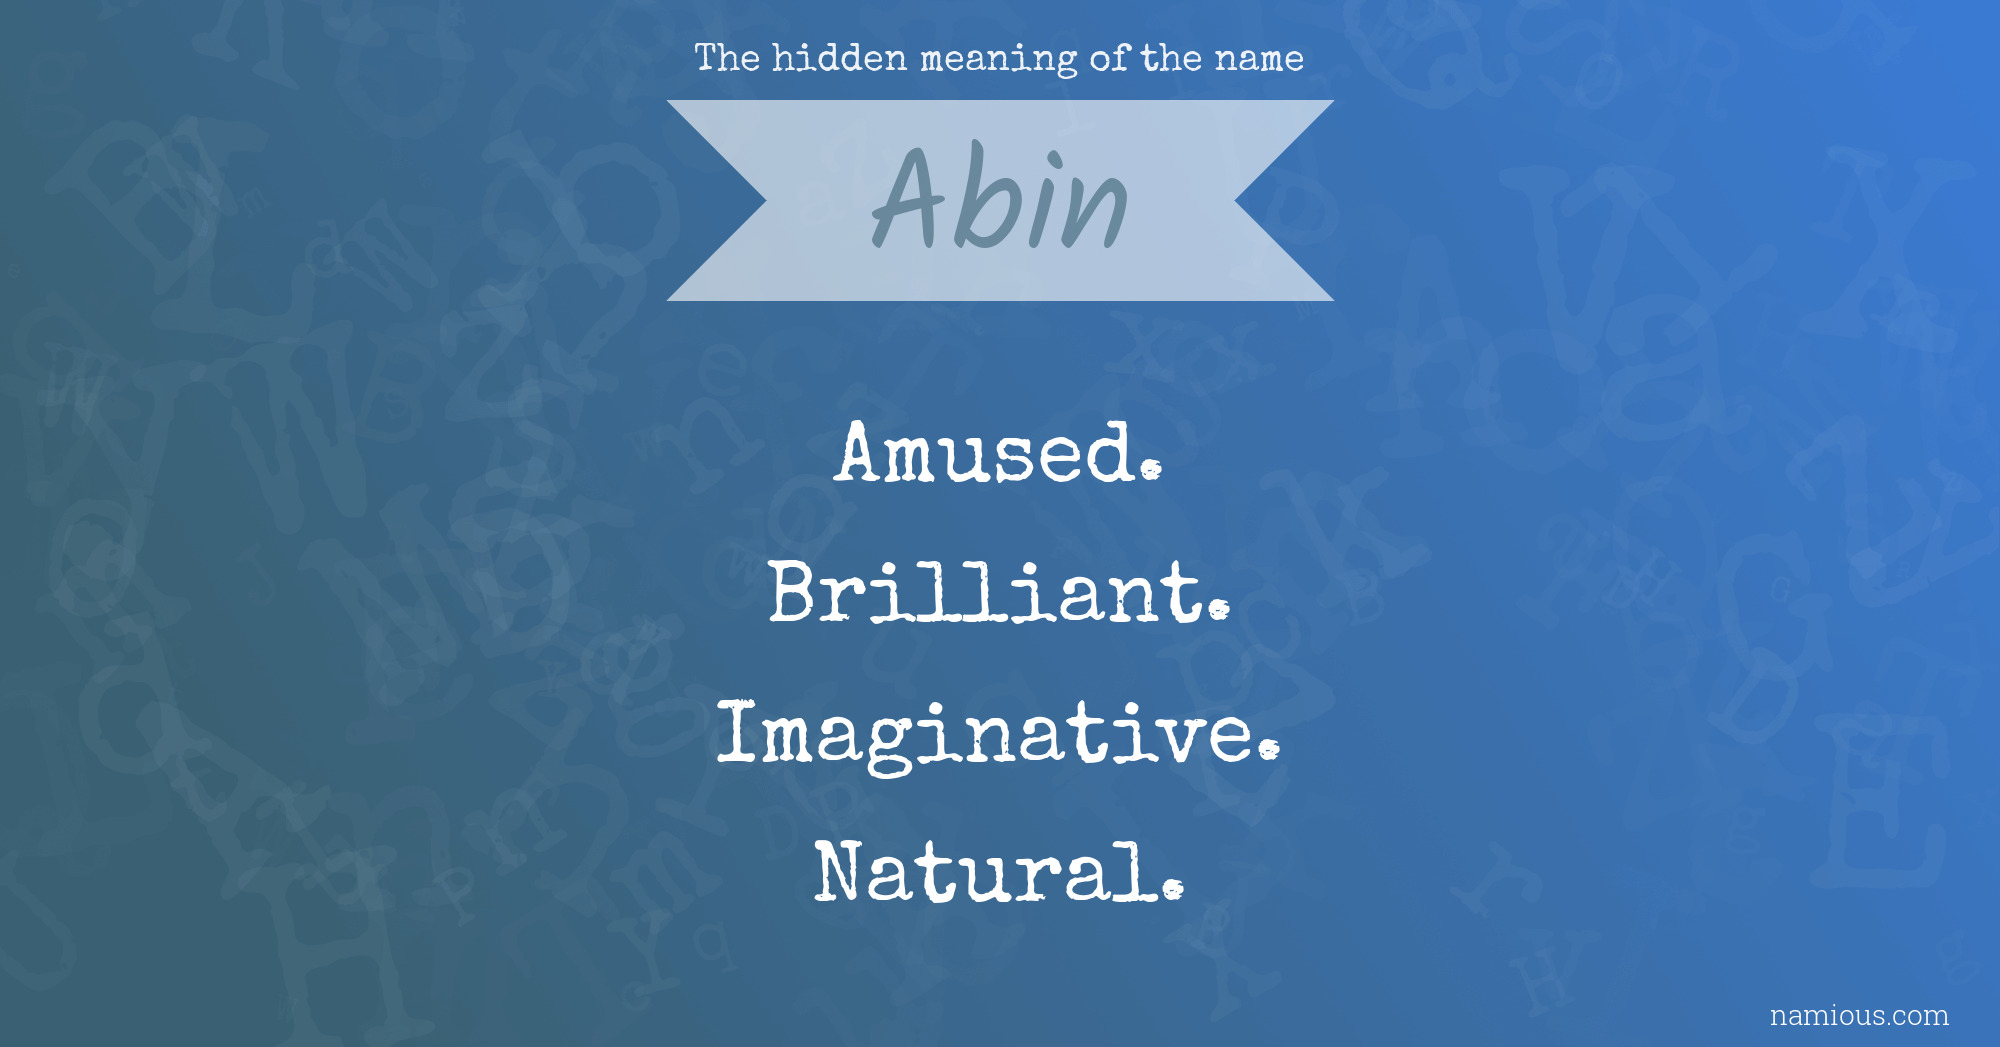 The hidden meaning of the name Abin